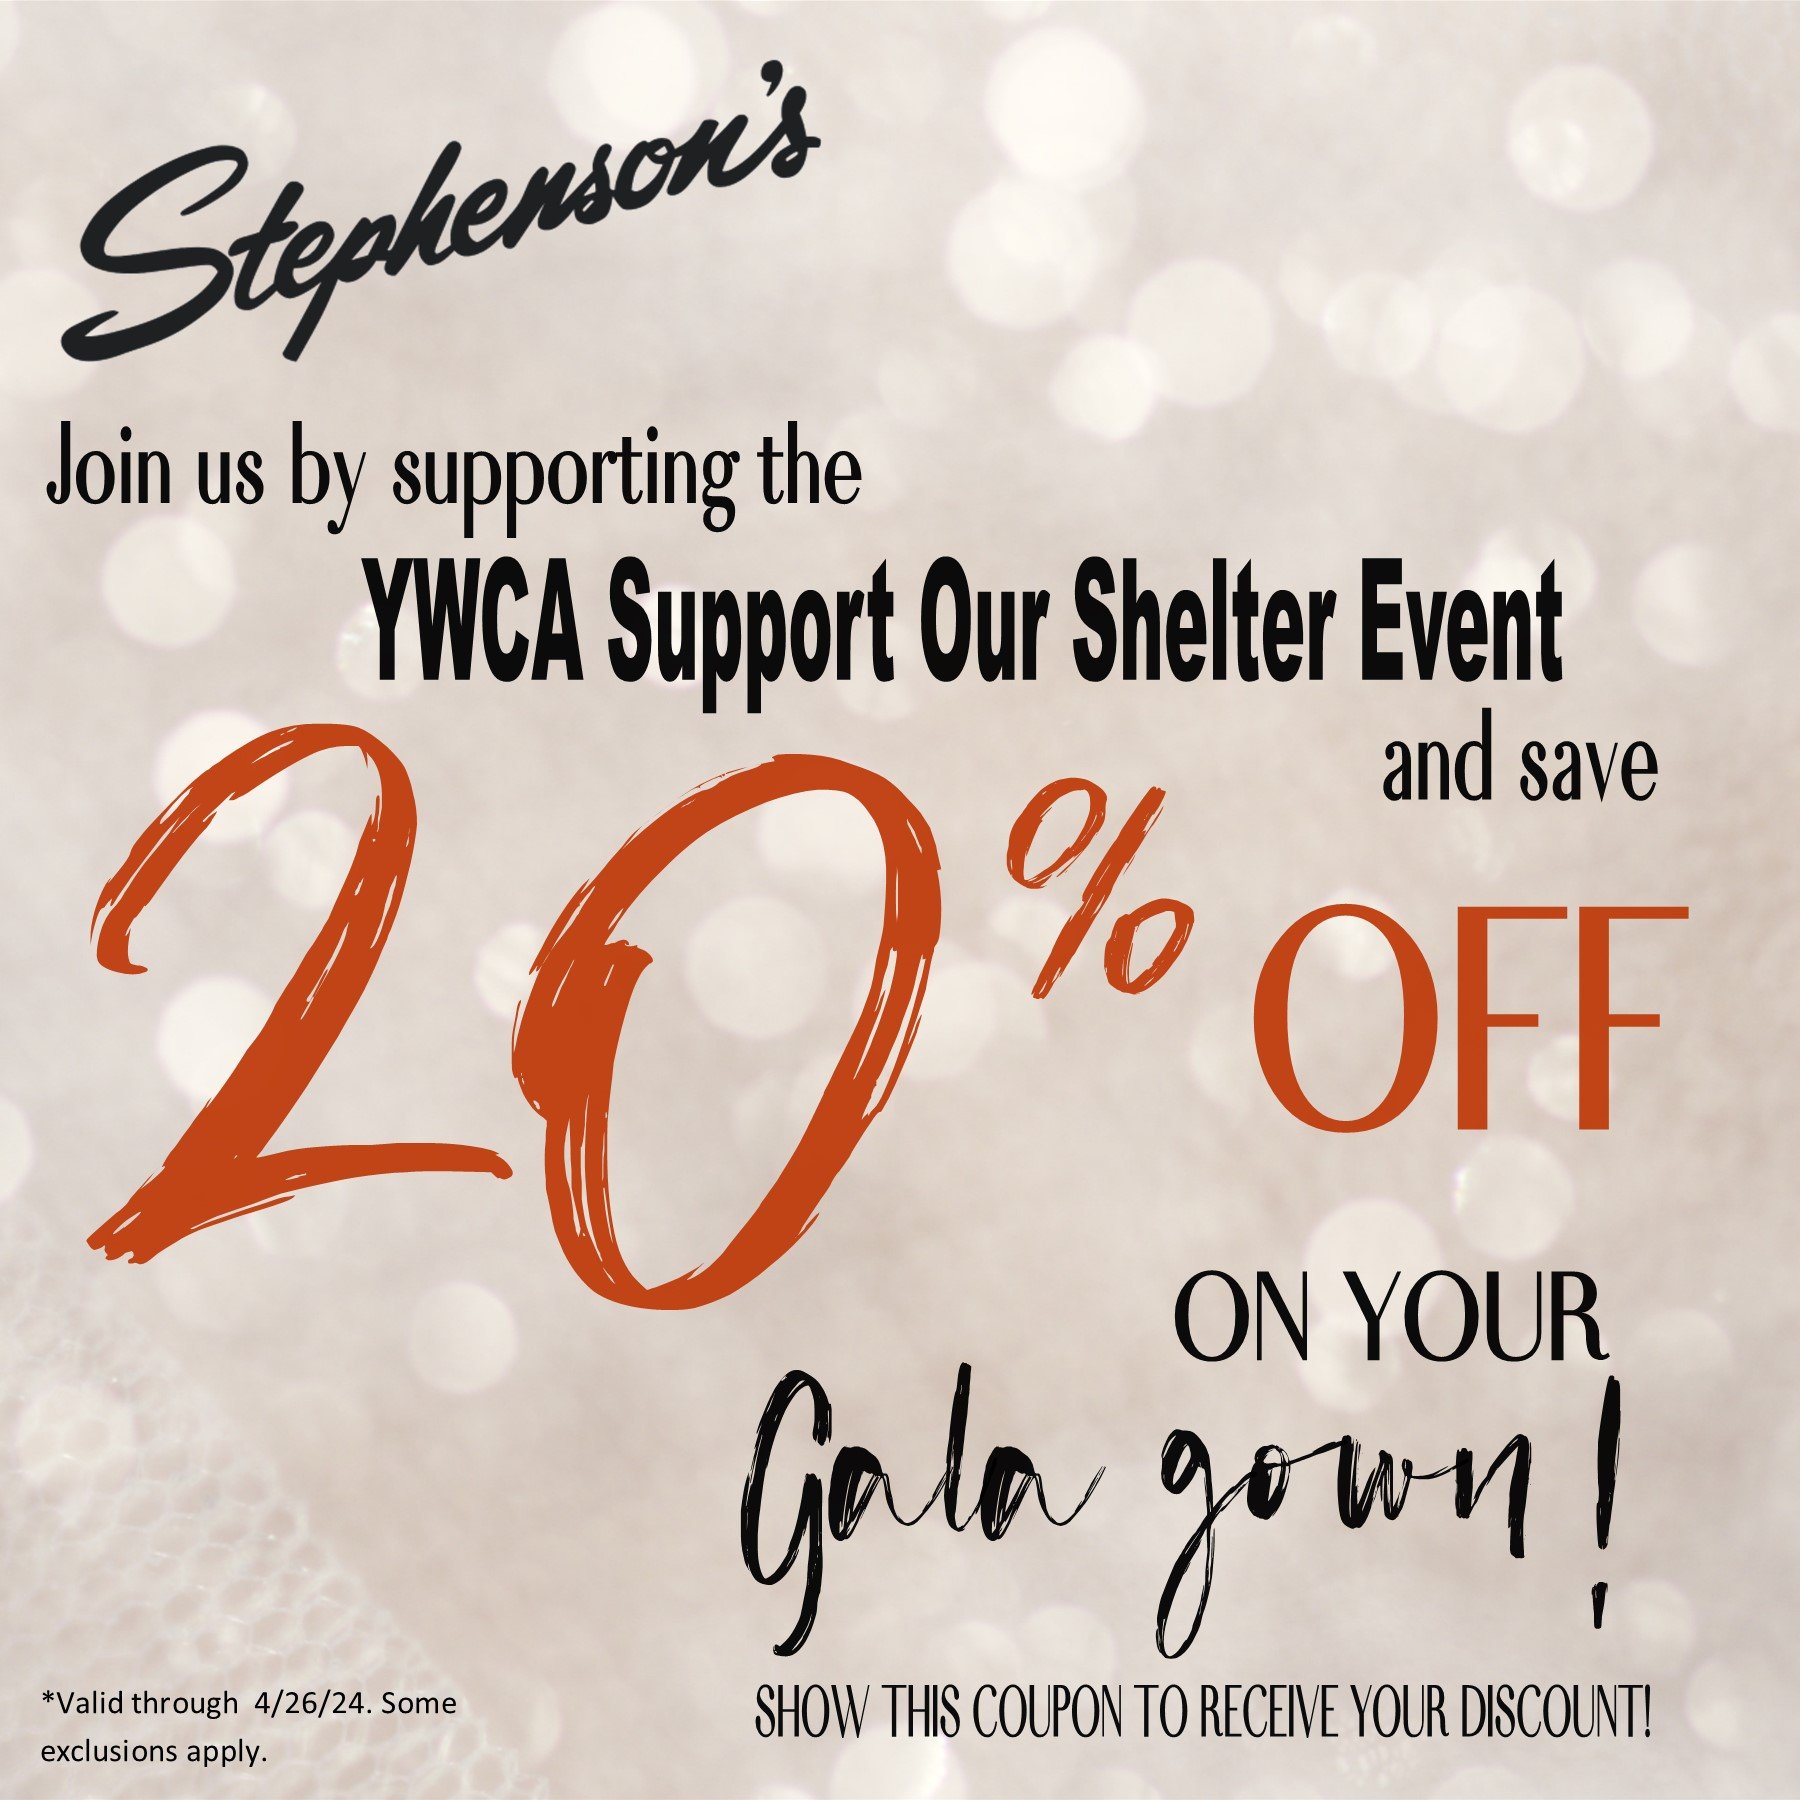 A great offer for a great cause...When you stop in to purchase a gown for the YWCA Support Our Shelter Event, we will give you 20% off!! (Just show us this coupon at checkout!) This event is taking place in just over 2 weeks, so we hope to see you so